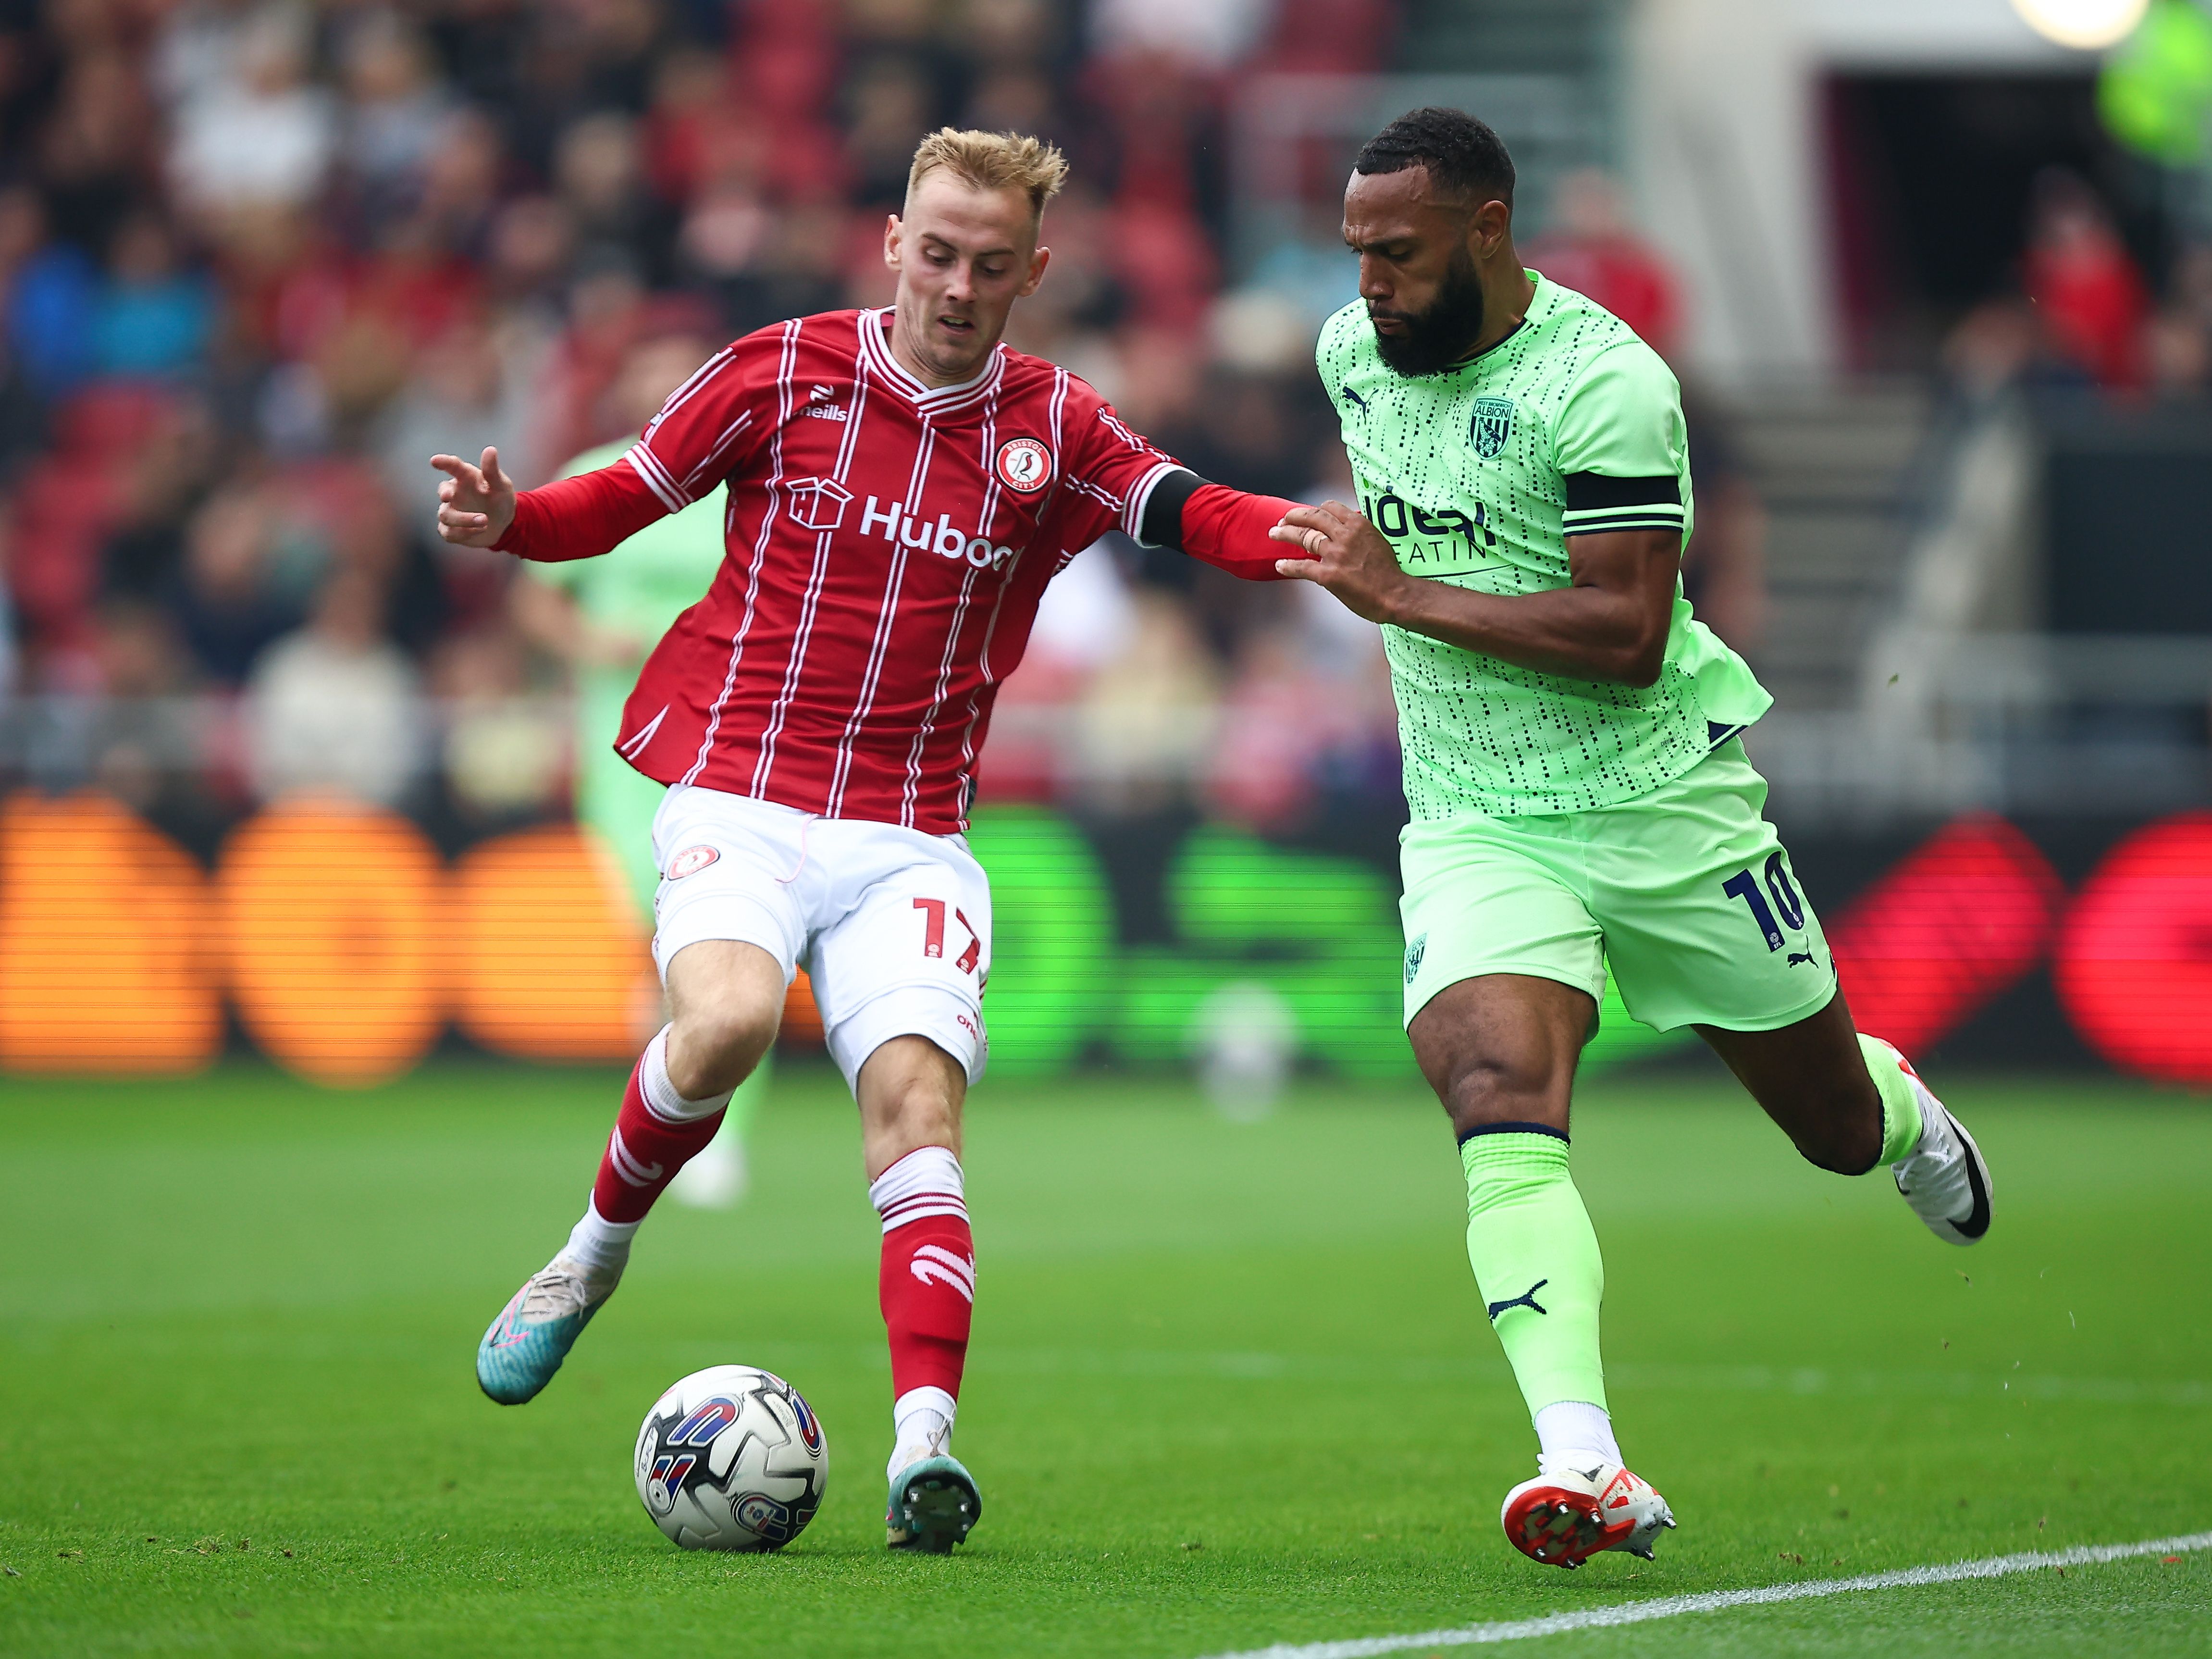 Matty Phillips battles for the ball with a Bristol City player at Ashton Gate while wearing the lime green away kit